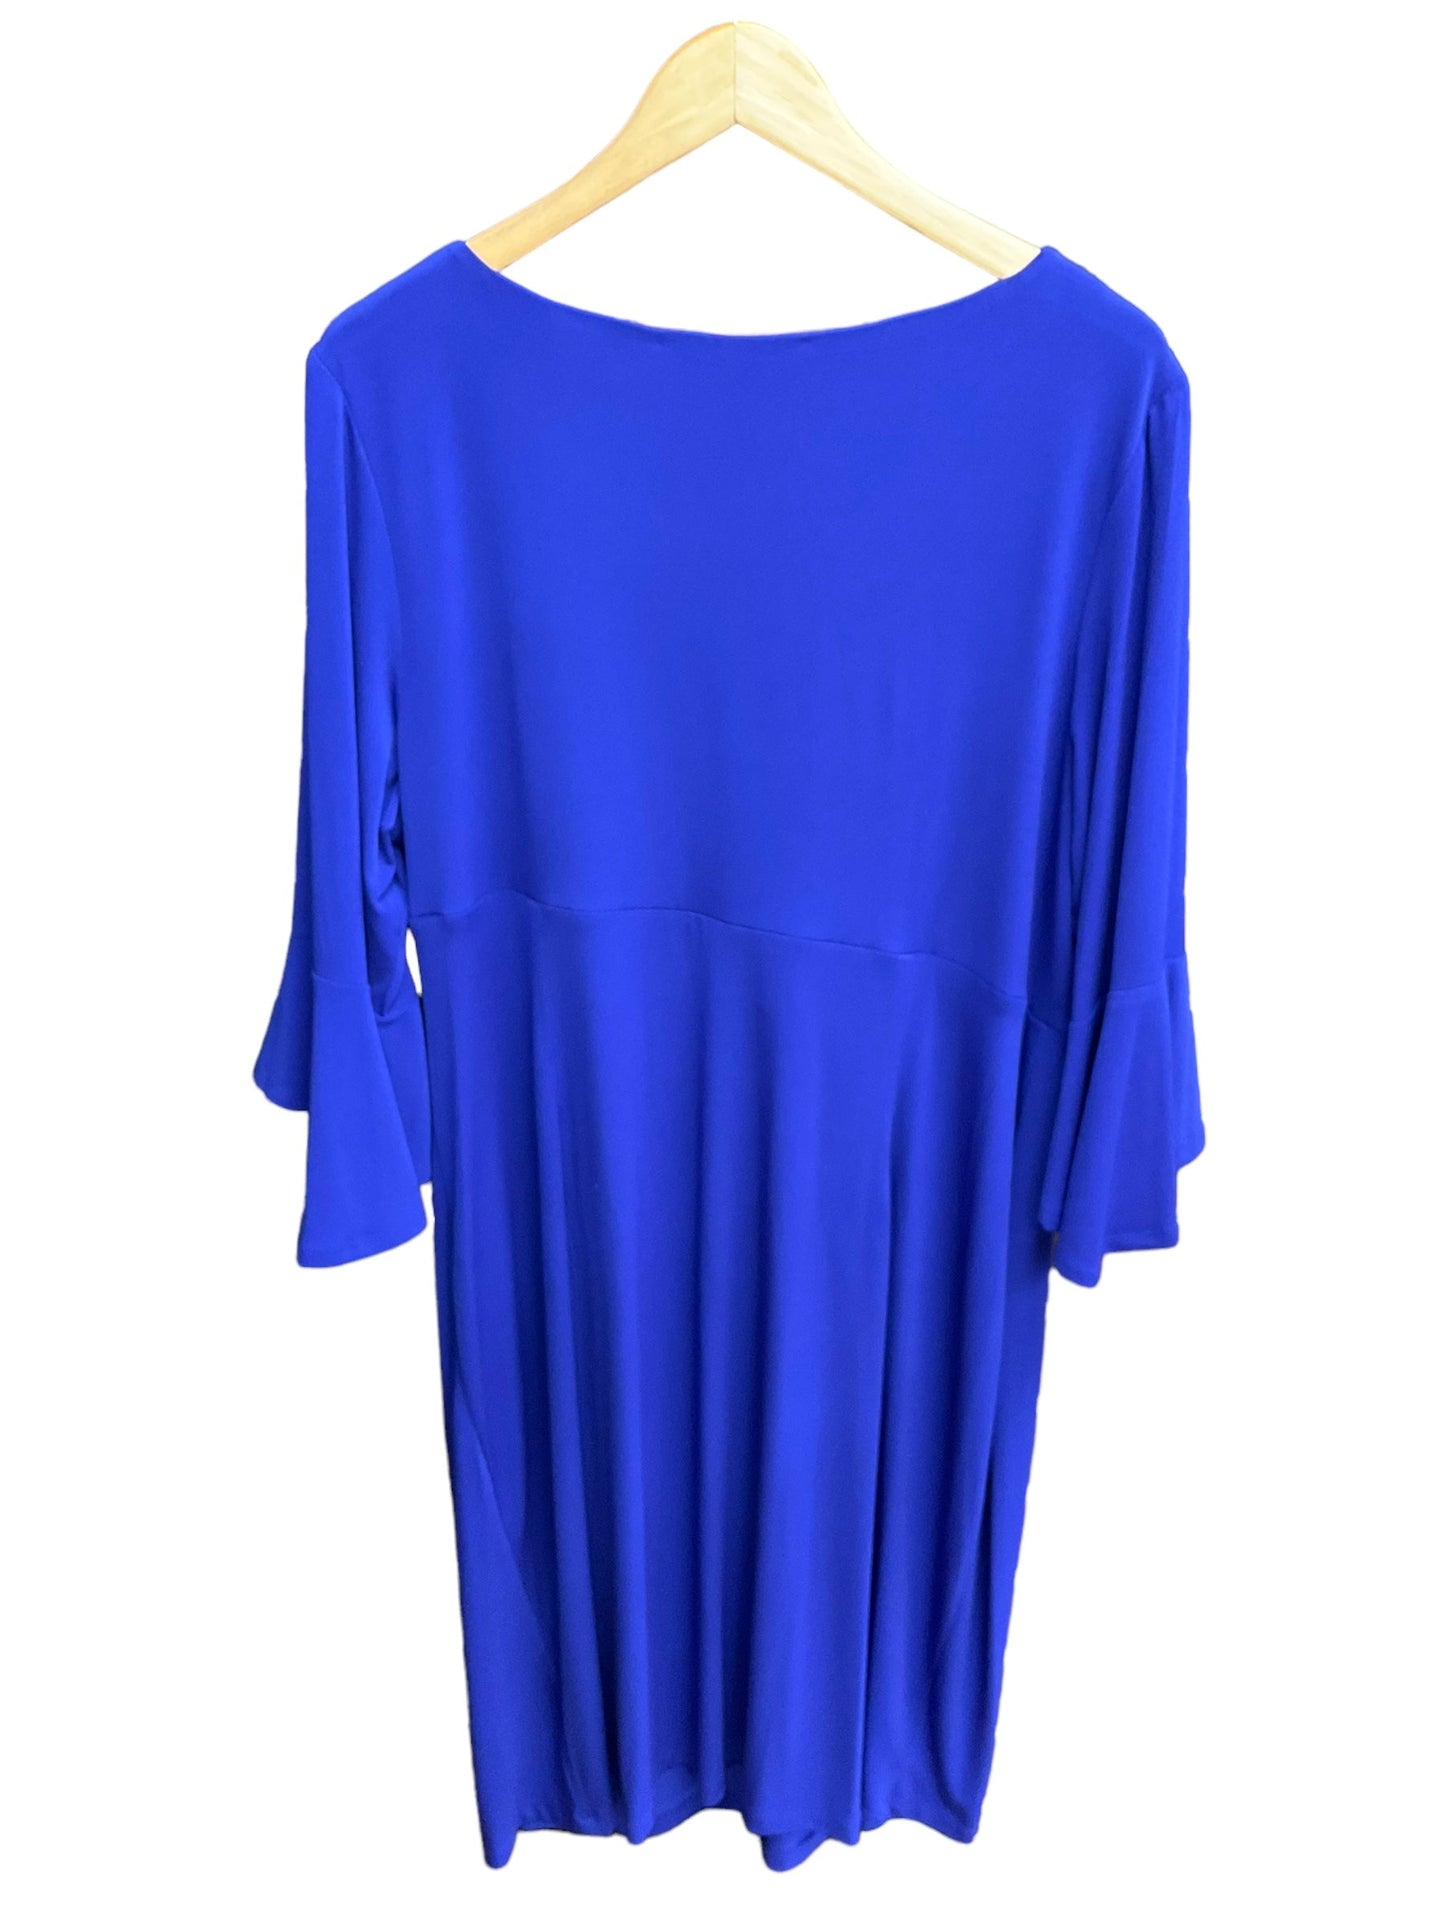 Blue Dress Casual Midi Connected Apparel, Size 2x